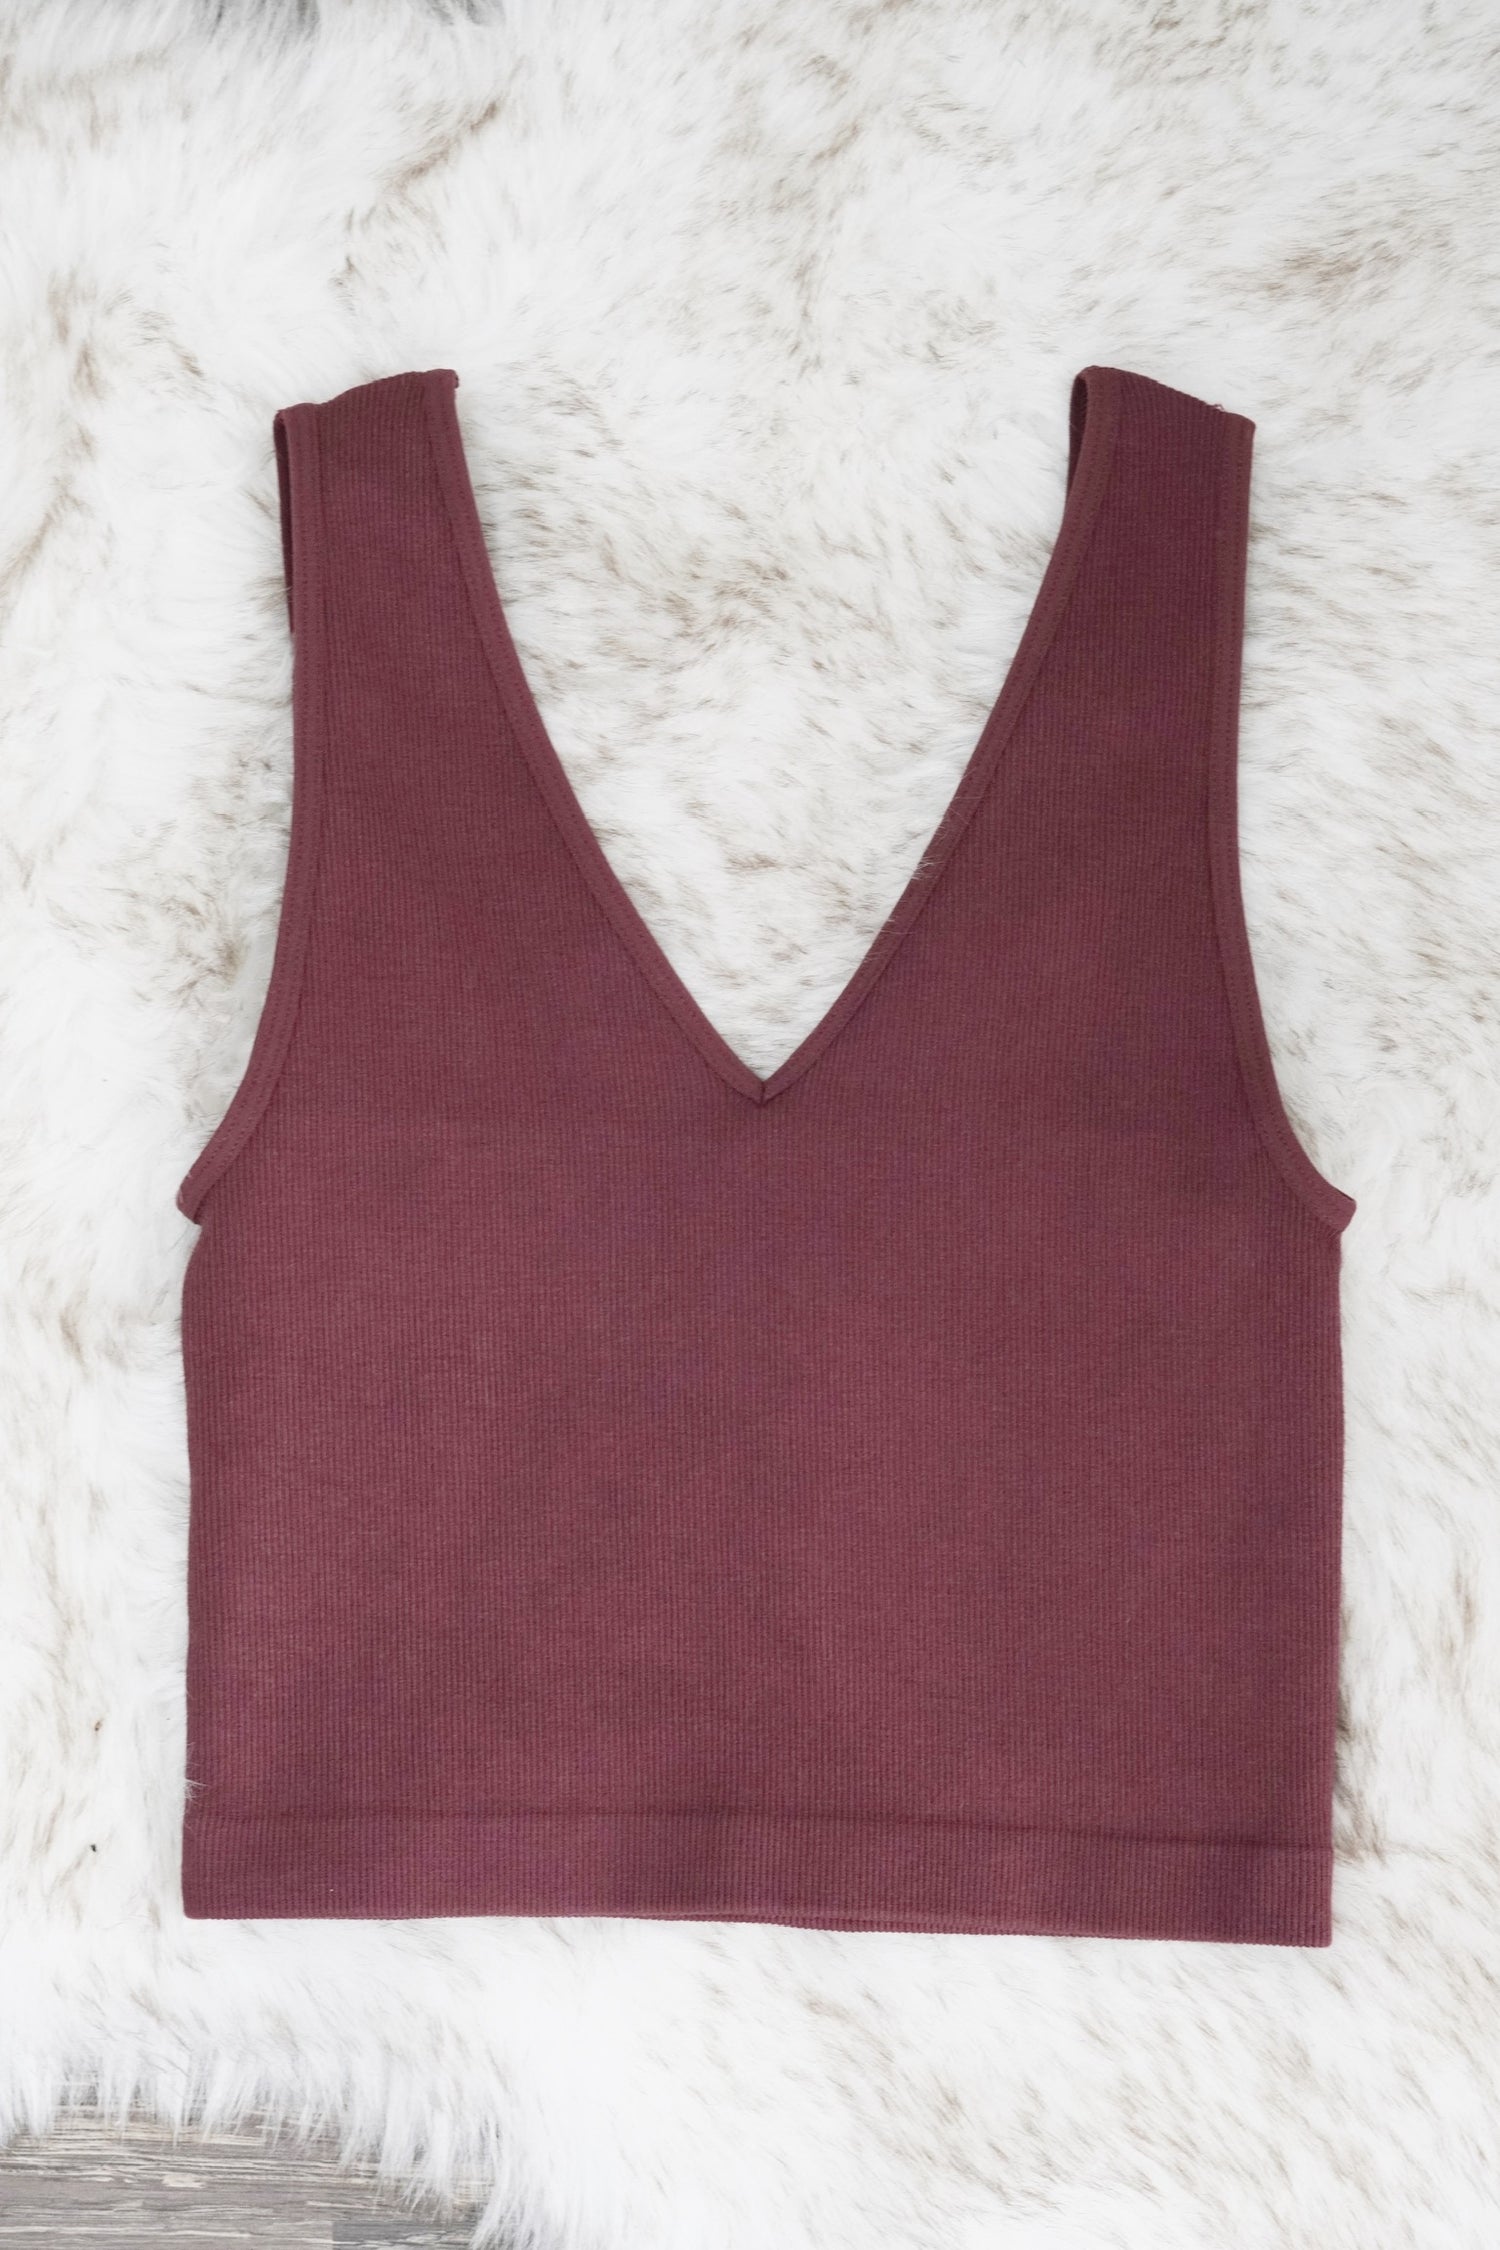 Beautiful basic Cropped Tank V-Neckline Sleeveless Ribbed Material Colors Plum Fitted Cropped 72% Modal, 24% Nylon, 4% Spandex